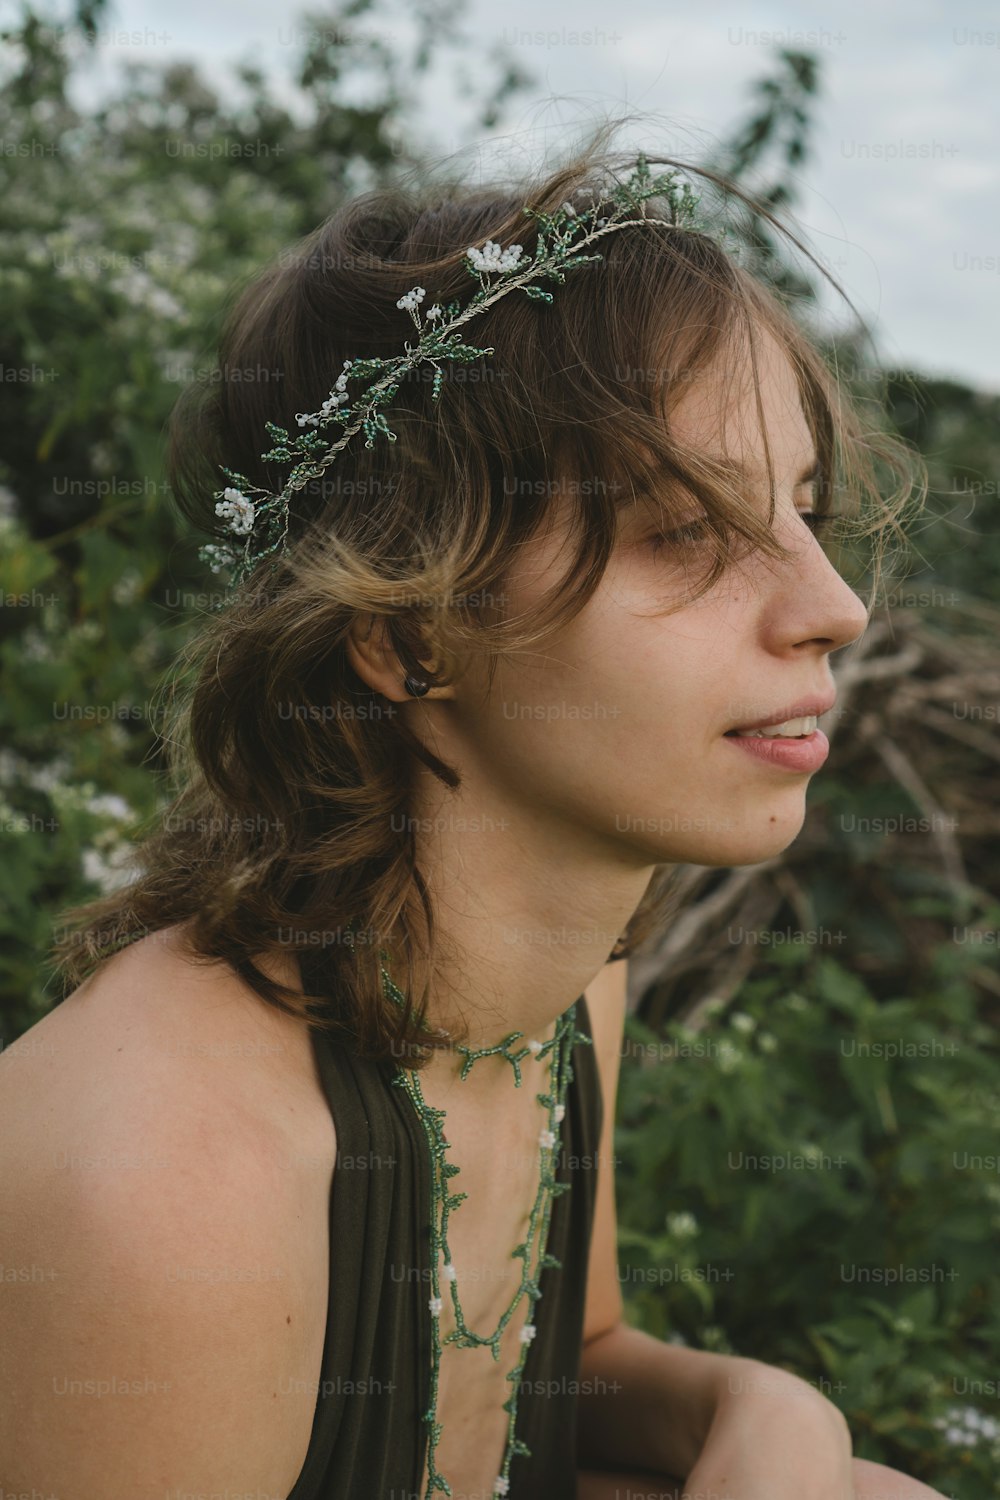 a woman wearing a necklace with flowers on it